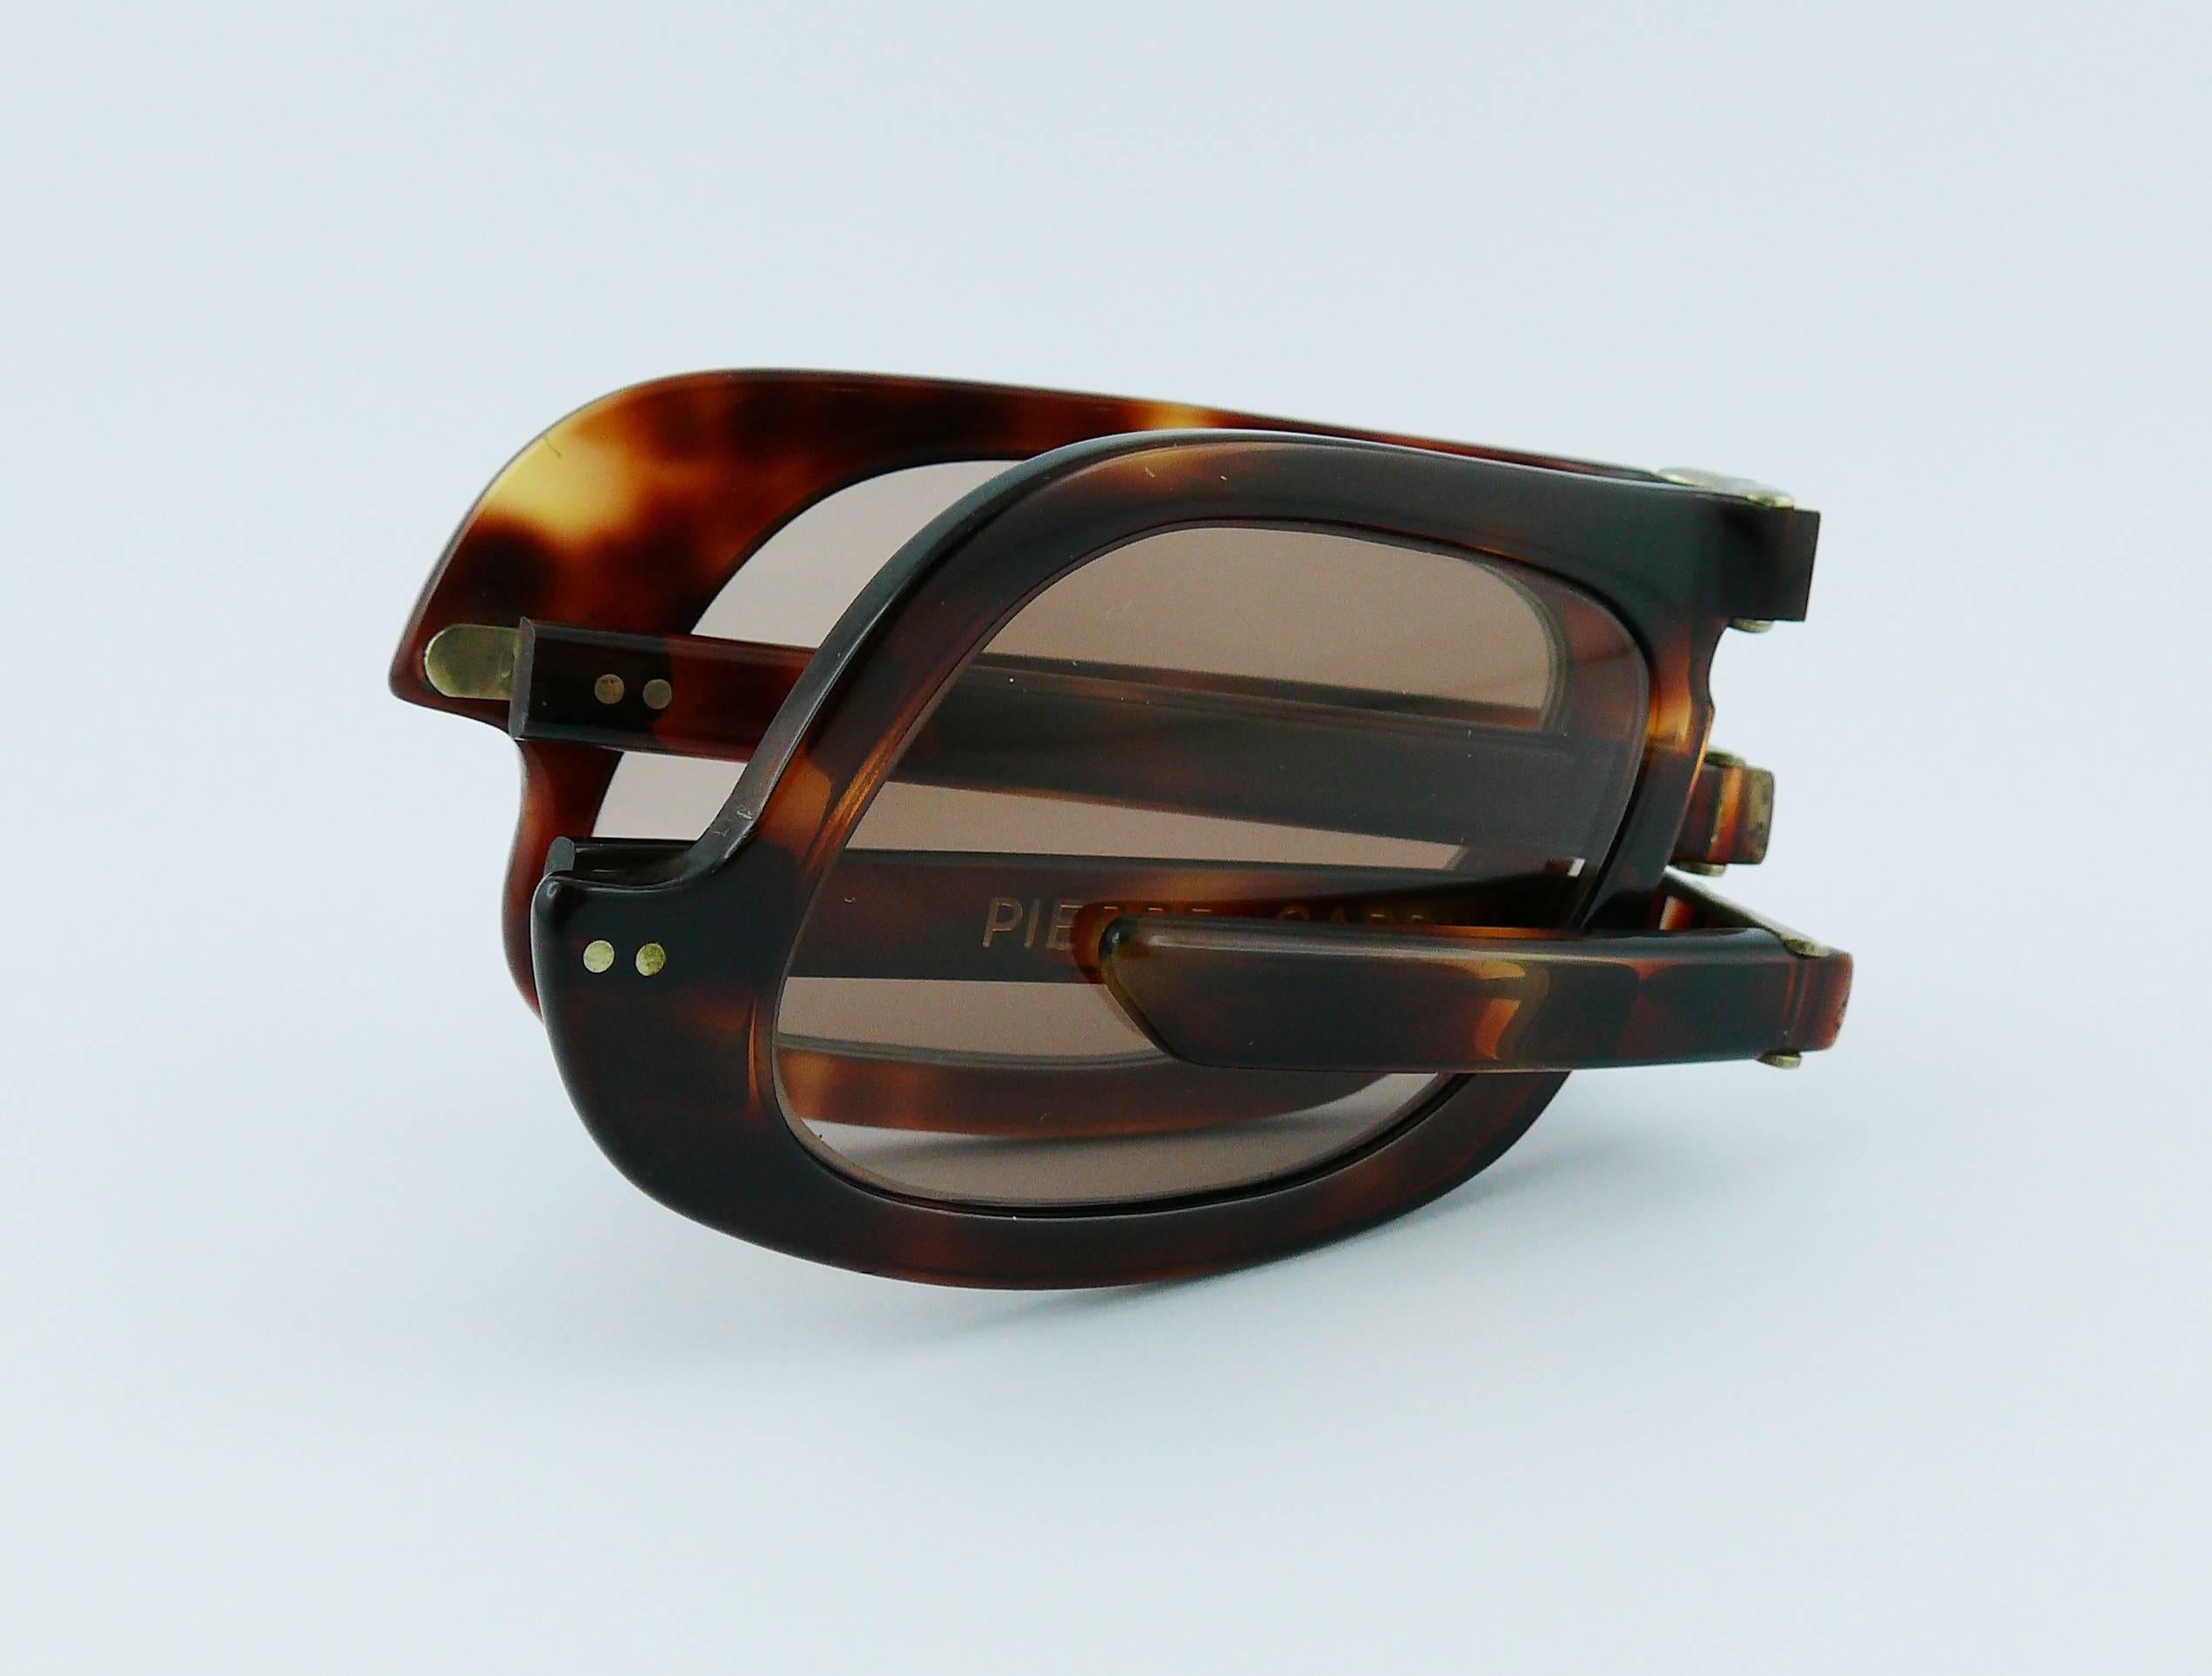 PIERRE CARDIN vintage rare asymetrical design folding sunglasses.

Brown smoked lenses.

Engraved PIERRE CARDIN on the inside temple.

Indicative measurements : frame max. width approx. 16.3 cm (6.42 inches) / width approx. 15.4 cm (6.06 inches) /